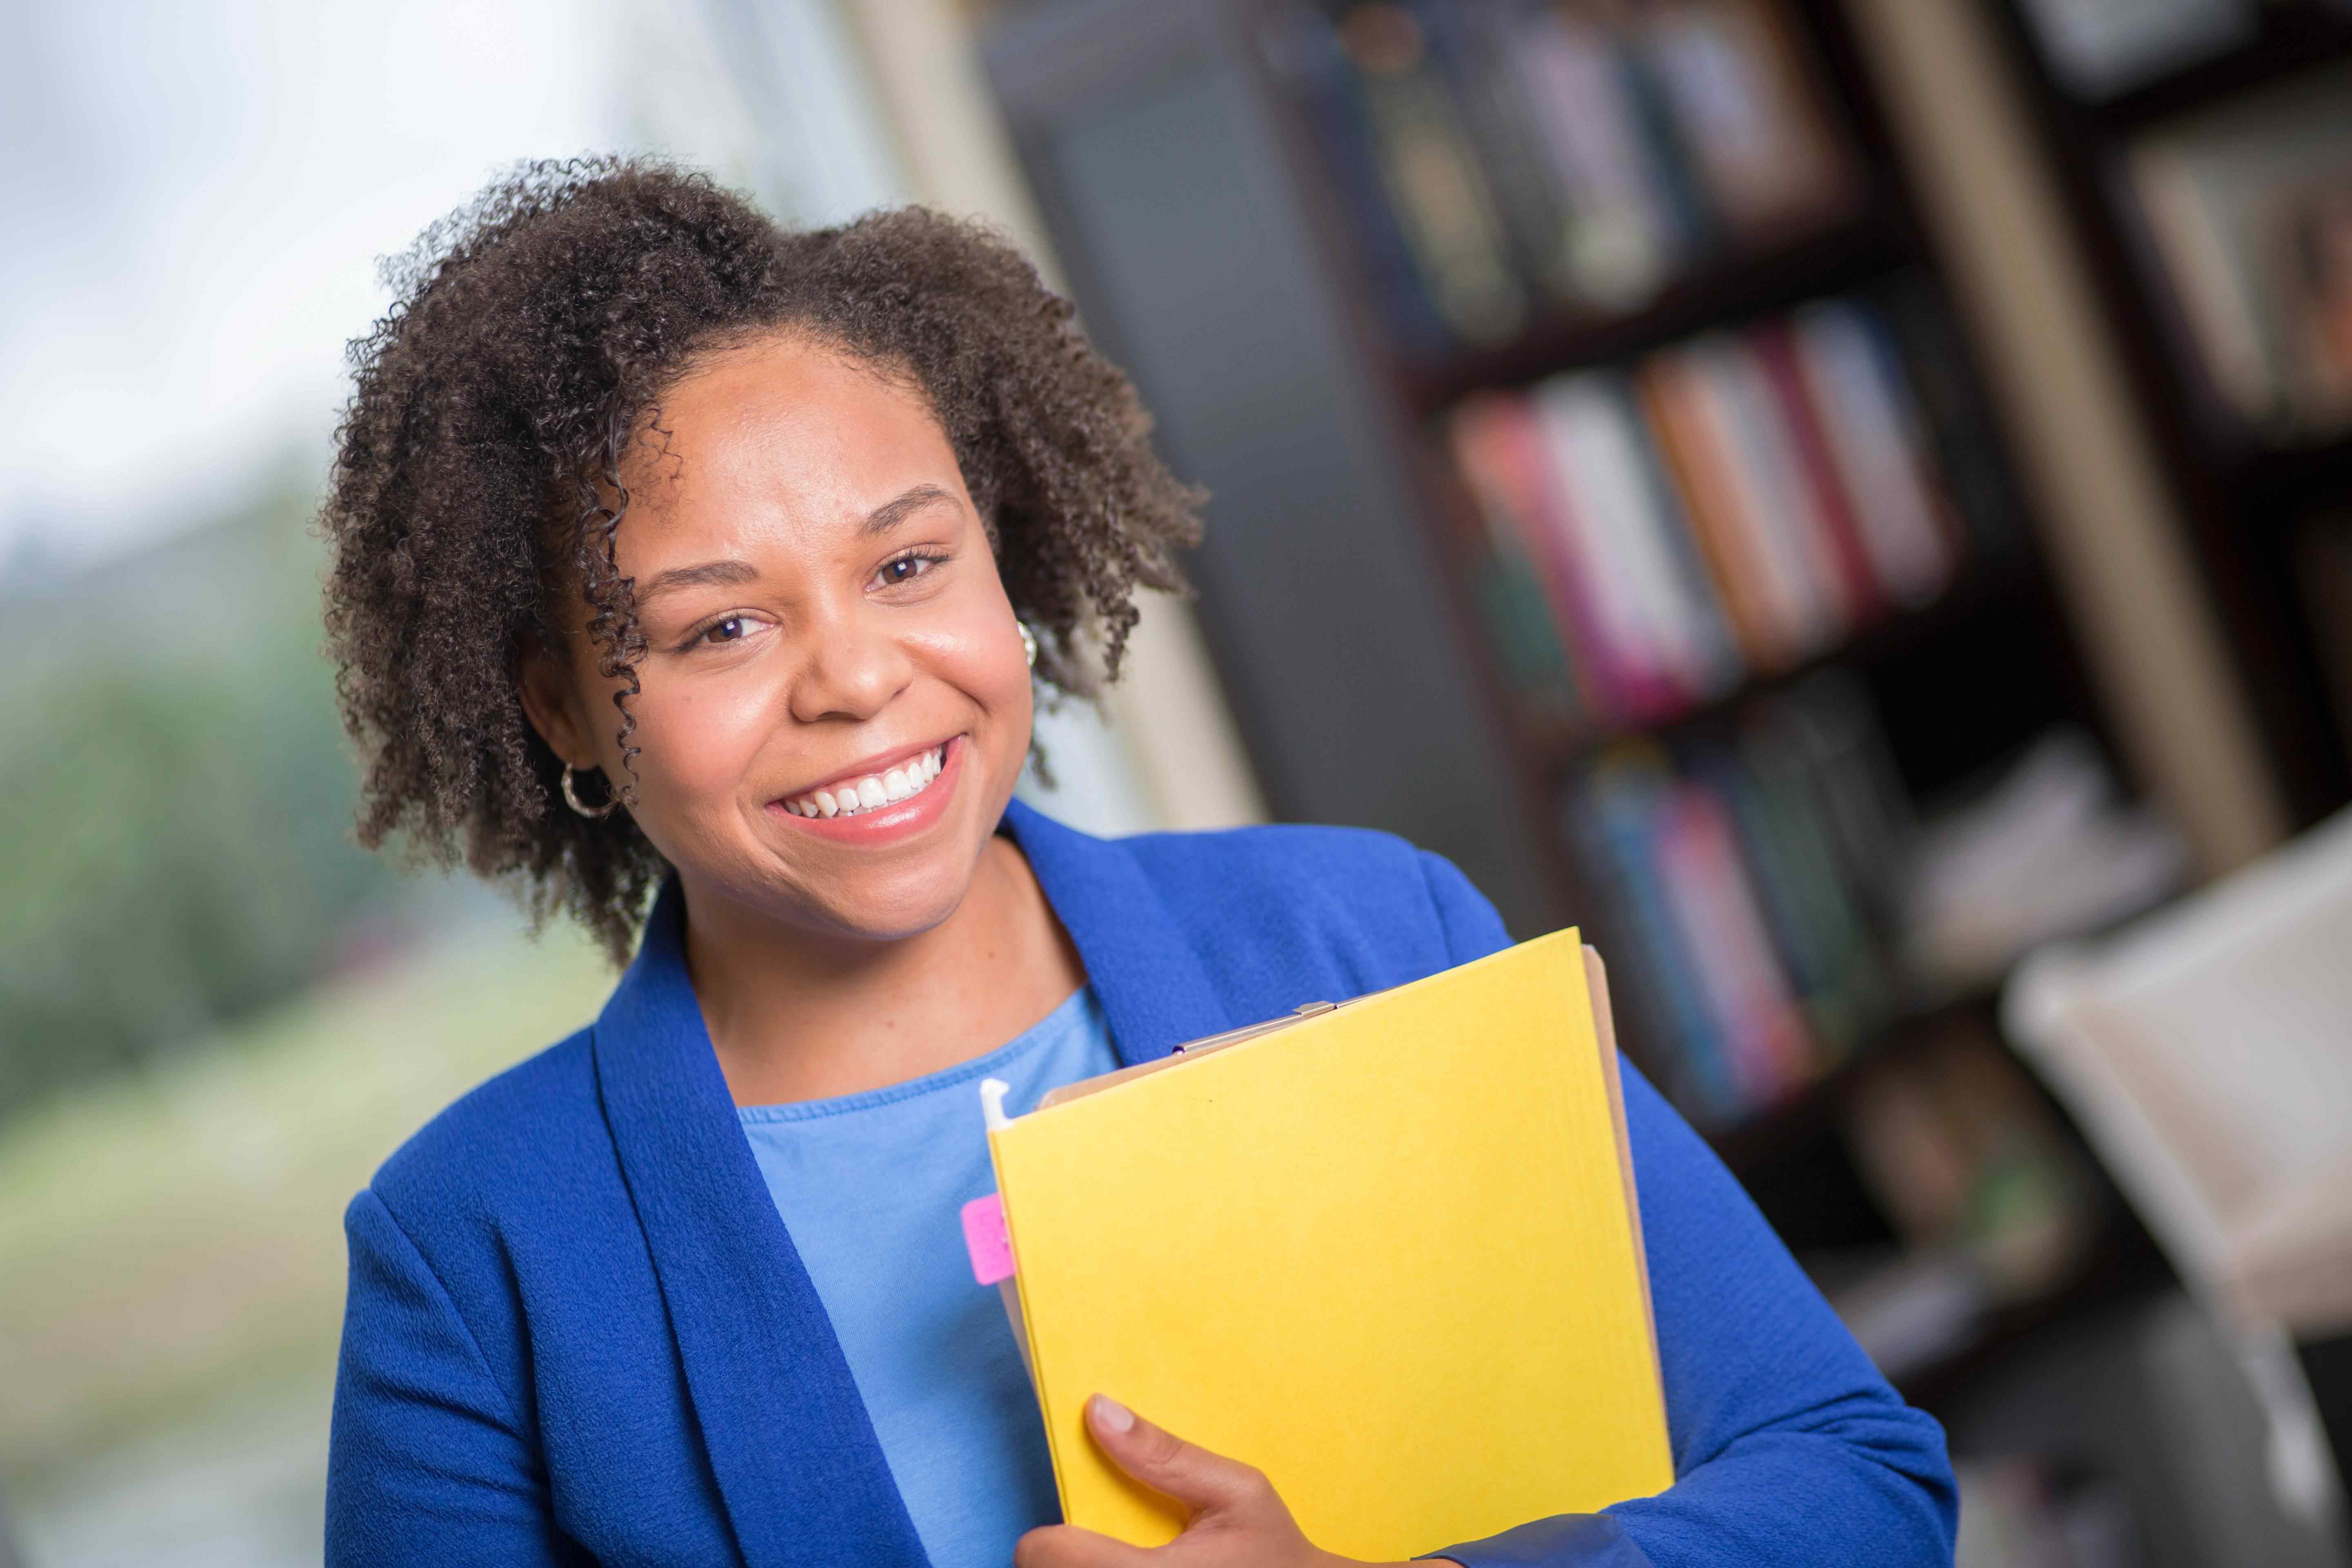 Business student smiling and holding a folio